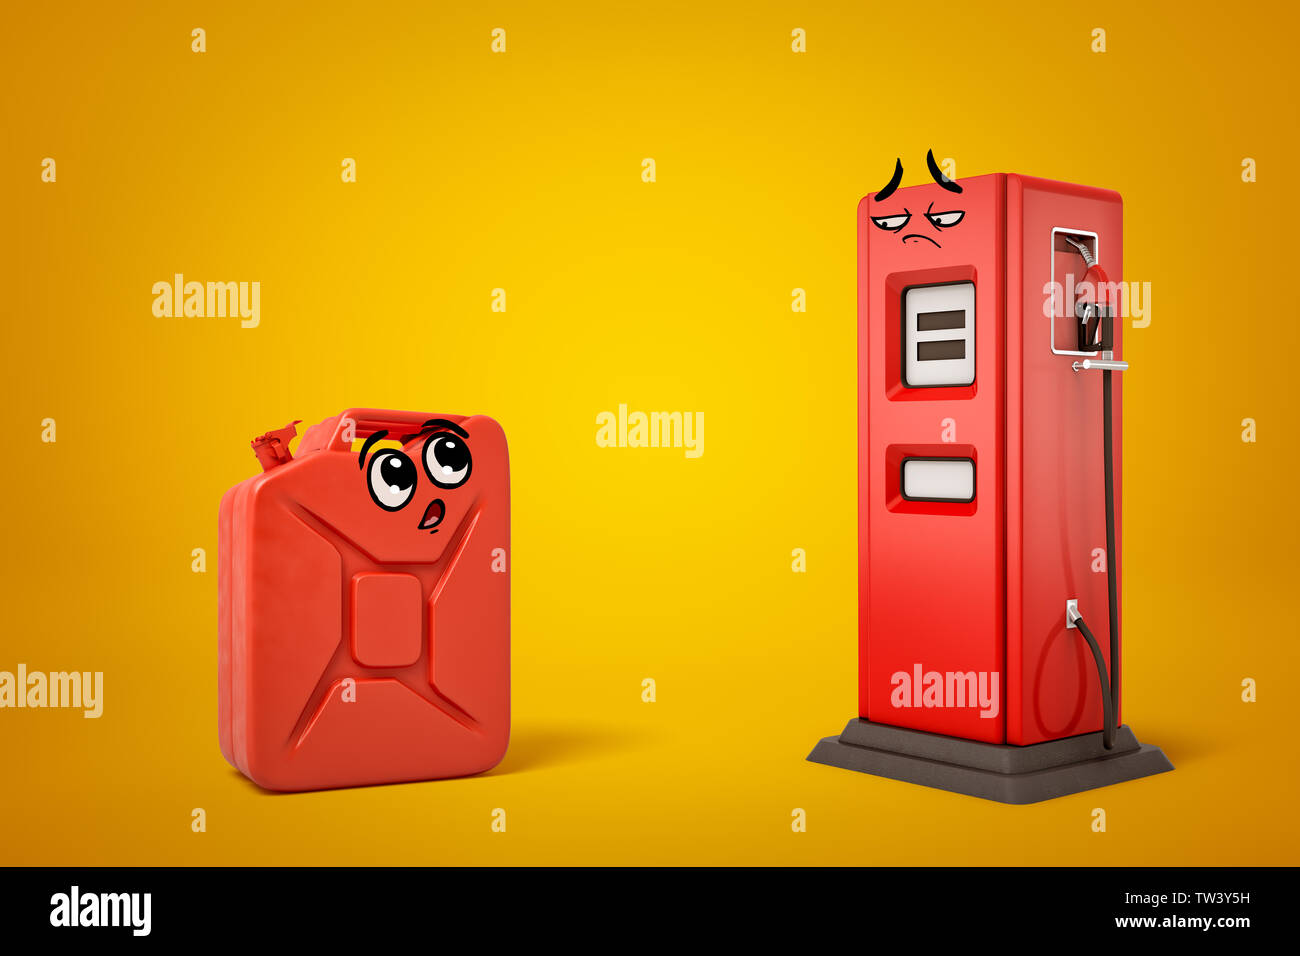 Download 3d Rendering Of Red Gasoline Can And Red Filling Station With Cartoon Smiley Faces On Yellow Background Stock Photo Alamy Yellowimages Mockups